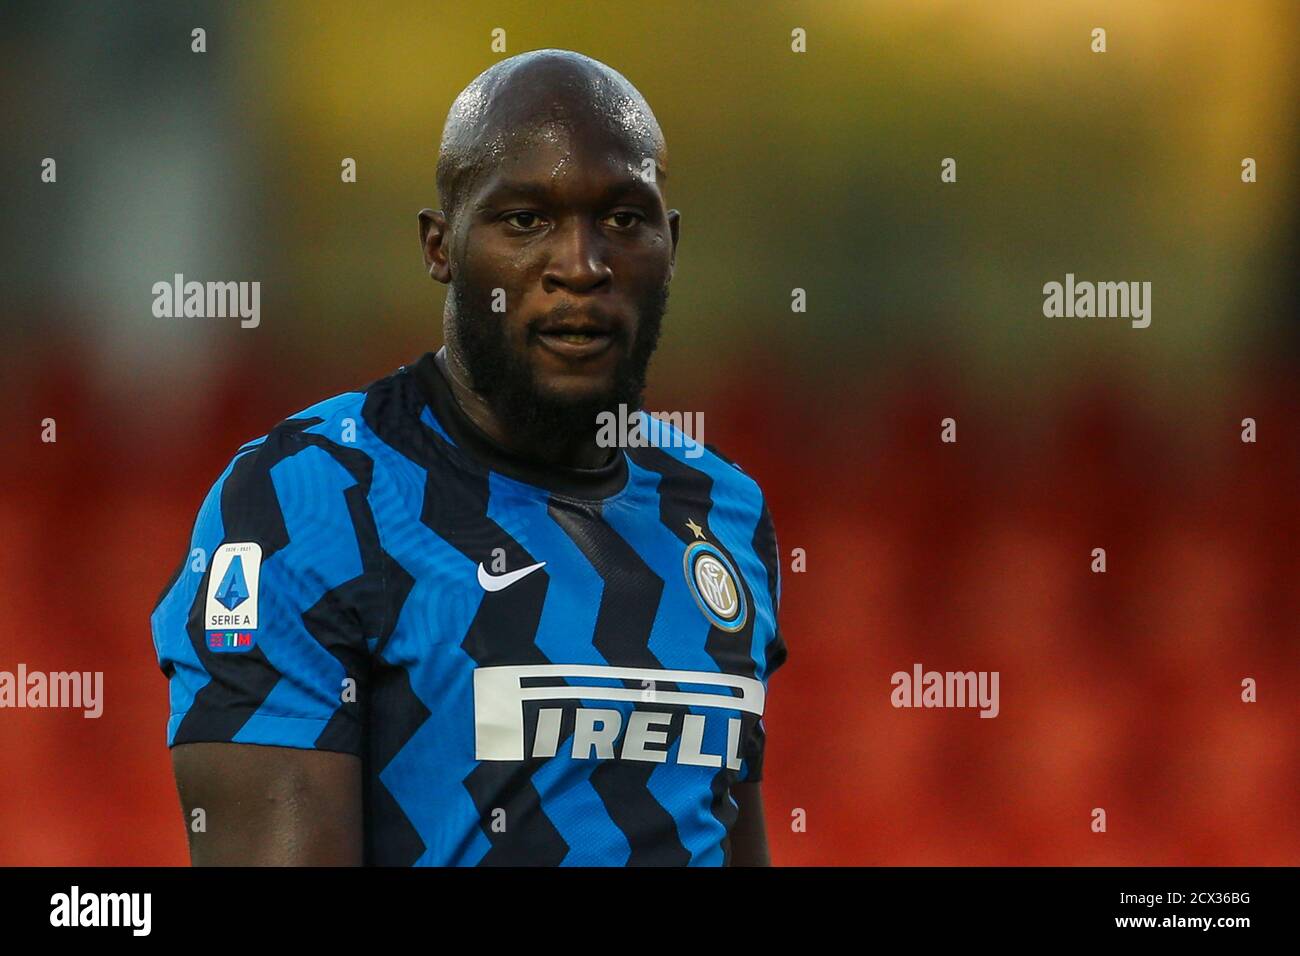 Benevento, Italy. 30th Sep, 2020. Inter's Belgian striker Romelu Lukaku looks during the Serie A football match Benevento vs Inter inter won 5-2 Credit: Independent Photo Agency/Alamy Live News Stock Photo